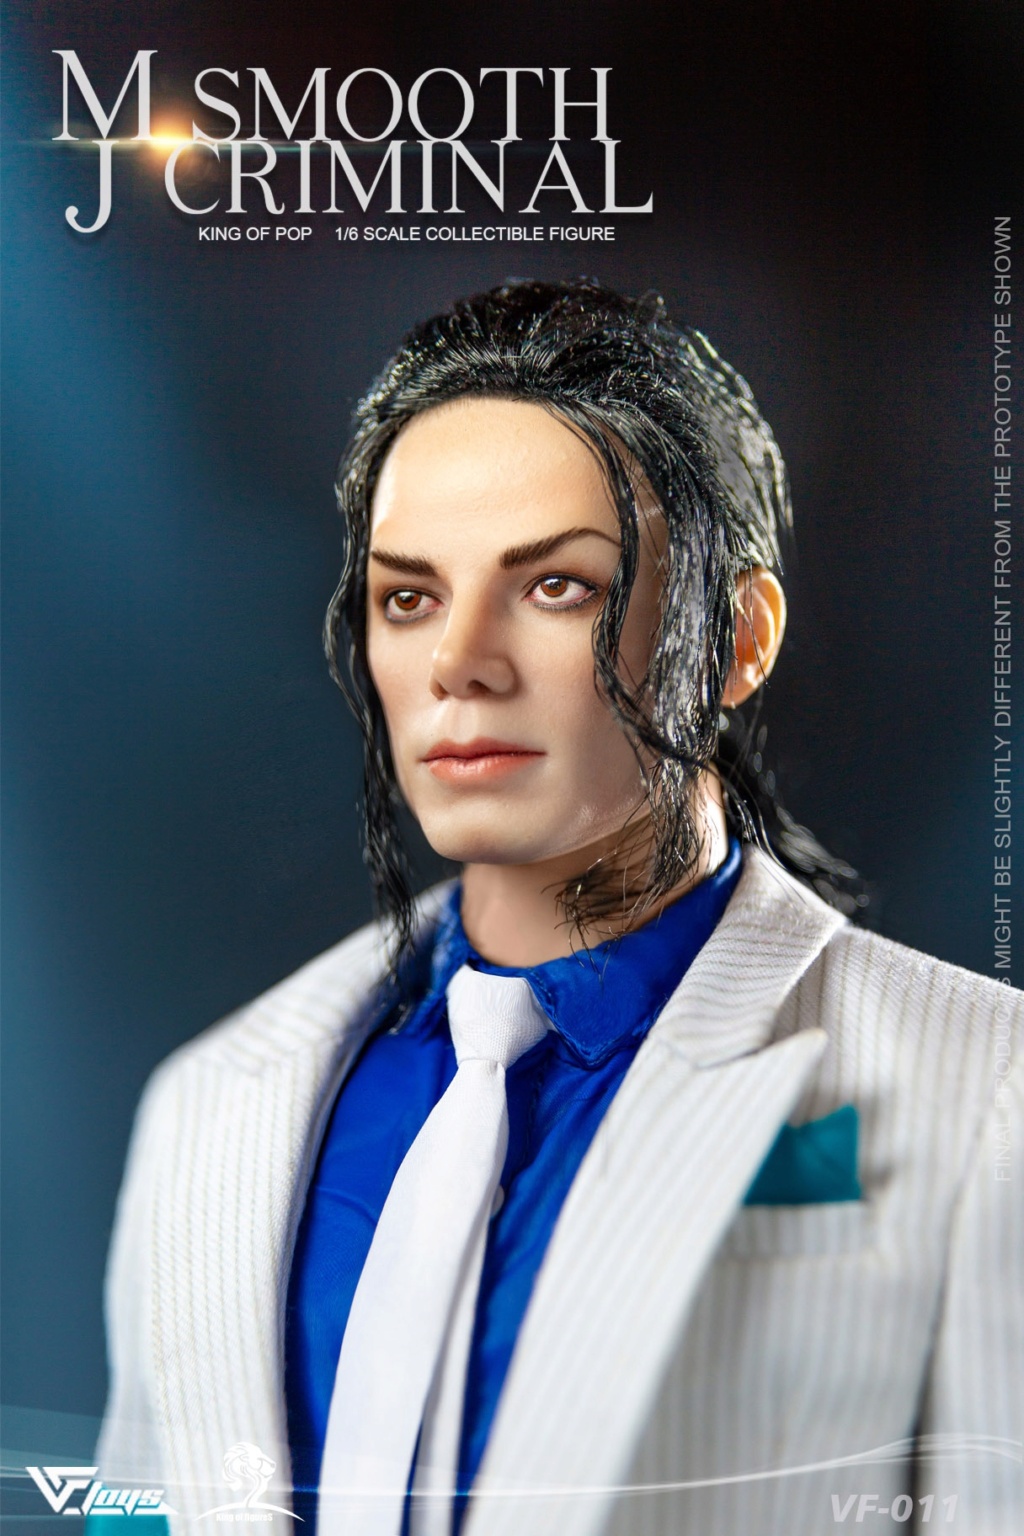 MJ - NEW PRODUCT: VFTOYS: VF-011 1/6 Scale MJ Smooth Criminal 16190210